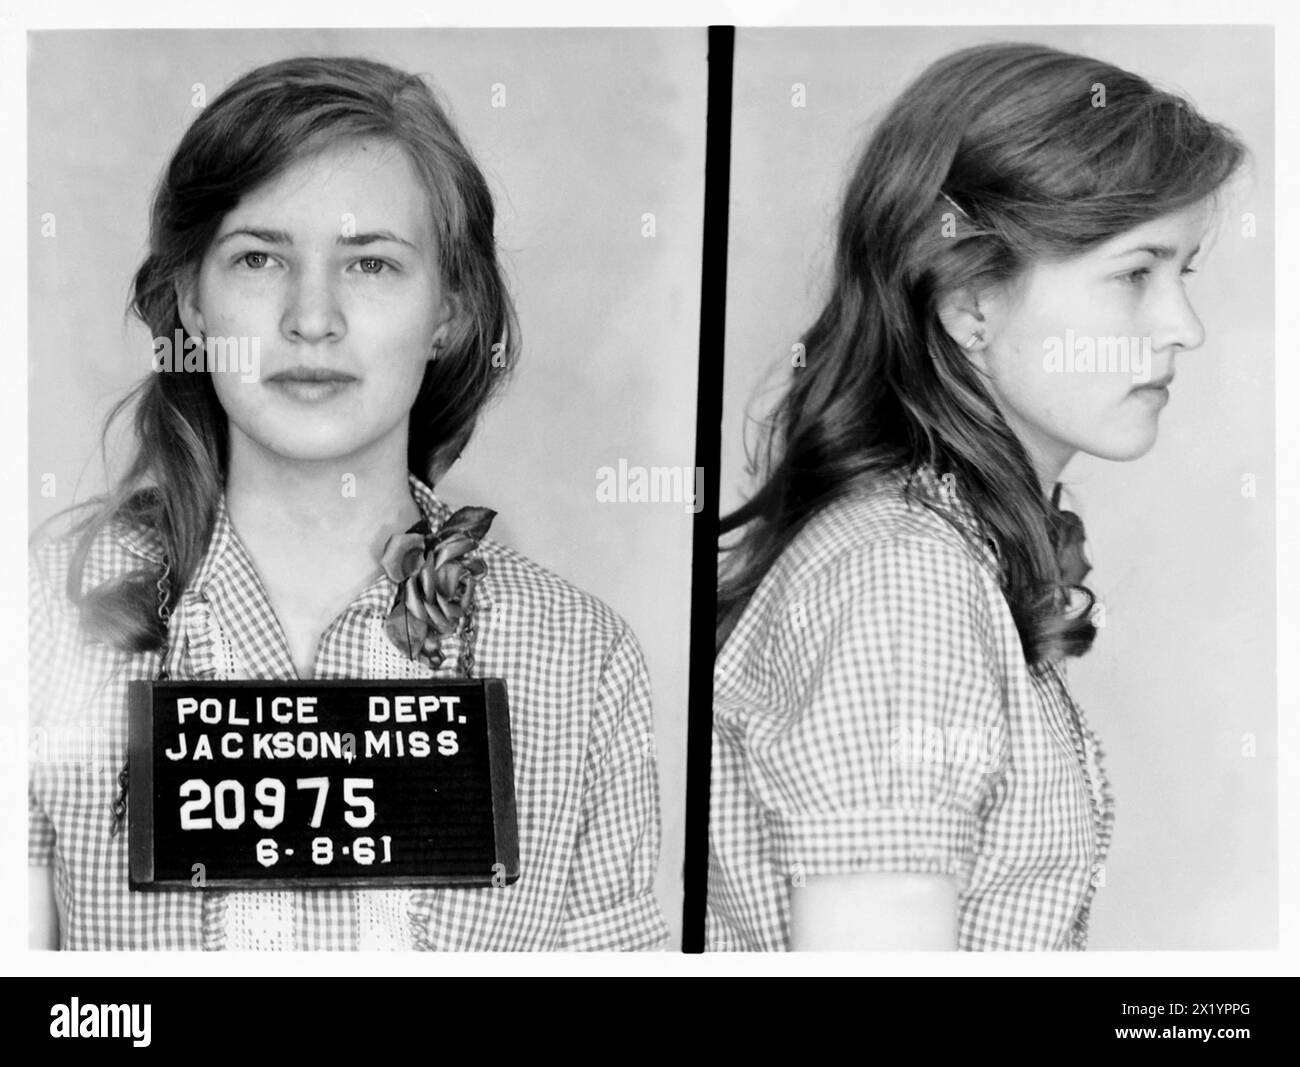 1961, 8 june , Jackson , Mississimpi . USA :  Mugshot of activist in the civil rights movement JOAN MULHOLLAND ( born in 1941 ), Mug Shot taken following his arrest in Jackson , Mississimpi , 1961 . Joan Mulholland and several other FREEDOM RIDERS were arrested for their participation in a early campaign of the civil rights movement .Unknown photographer of POLICE Department  - FOTO TESSERA - FOTO SEGNALETICA - MUG SHOT - MUG-SHOT - MUGSHOT - FOTO SEGNALETICA - portrait - ritratto - DIRITTI CIVILI - CIVIL RIGHTS - AFROAMERICANI - AFROAMERICANS - Afro Americani - Afro americans - ATTIVISTA - ab Stock Photo